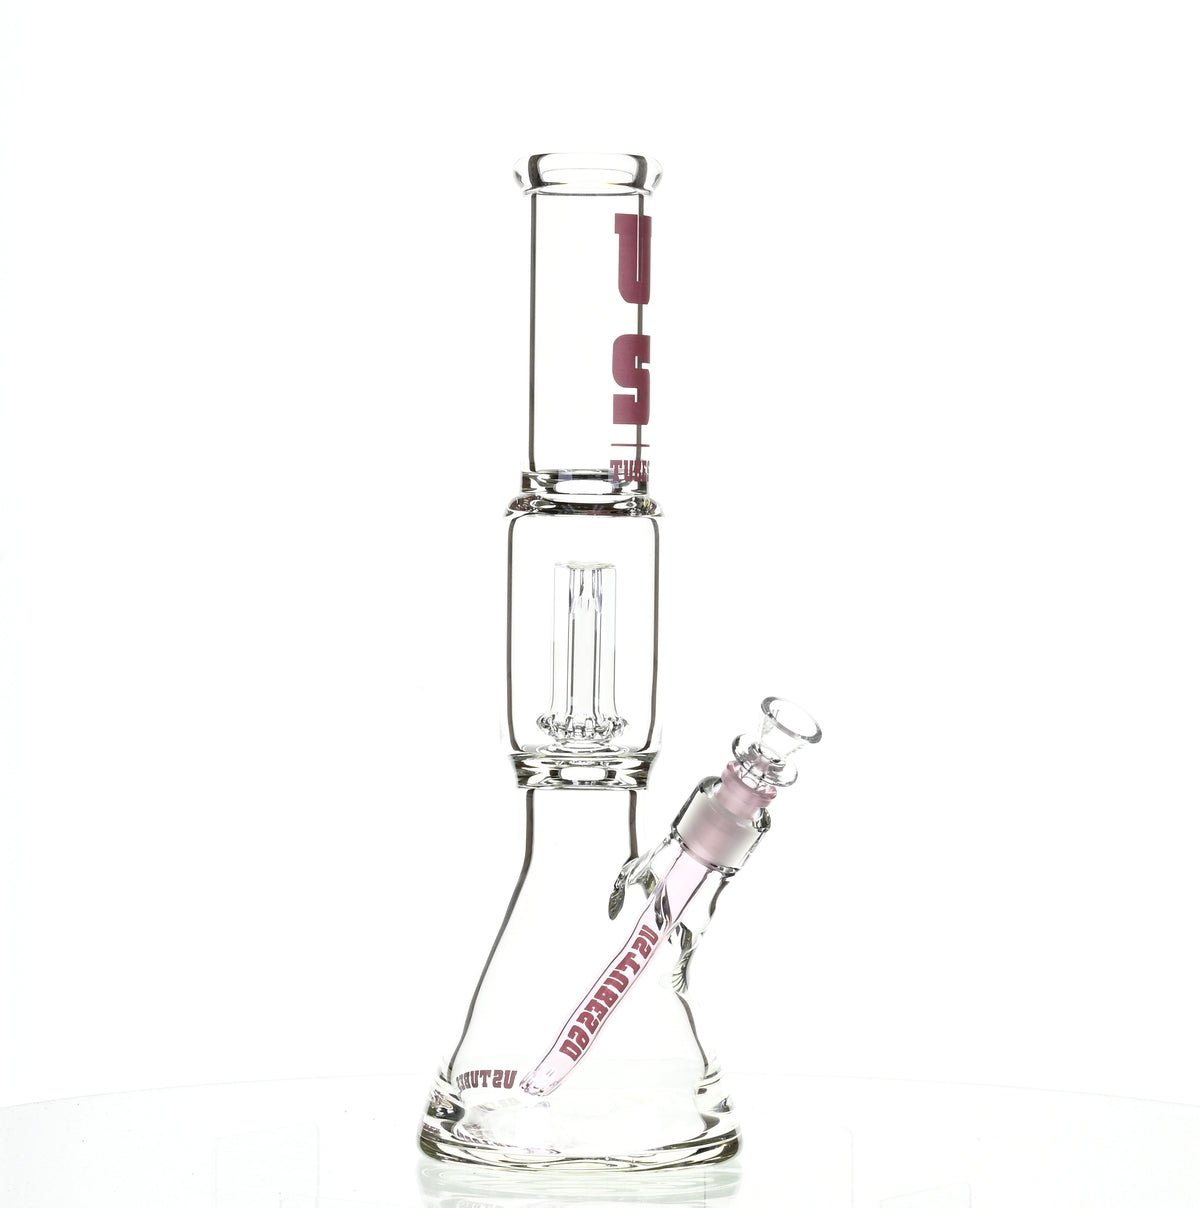 US TUBES 15" BEAKER W/SHOWERHEAD PERC AND PINK ACCENTS - SSSS